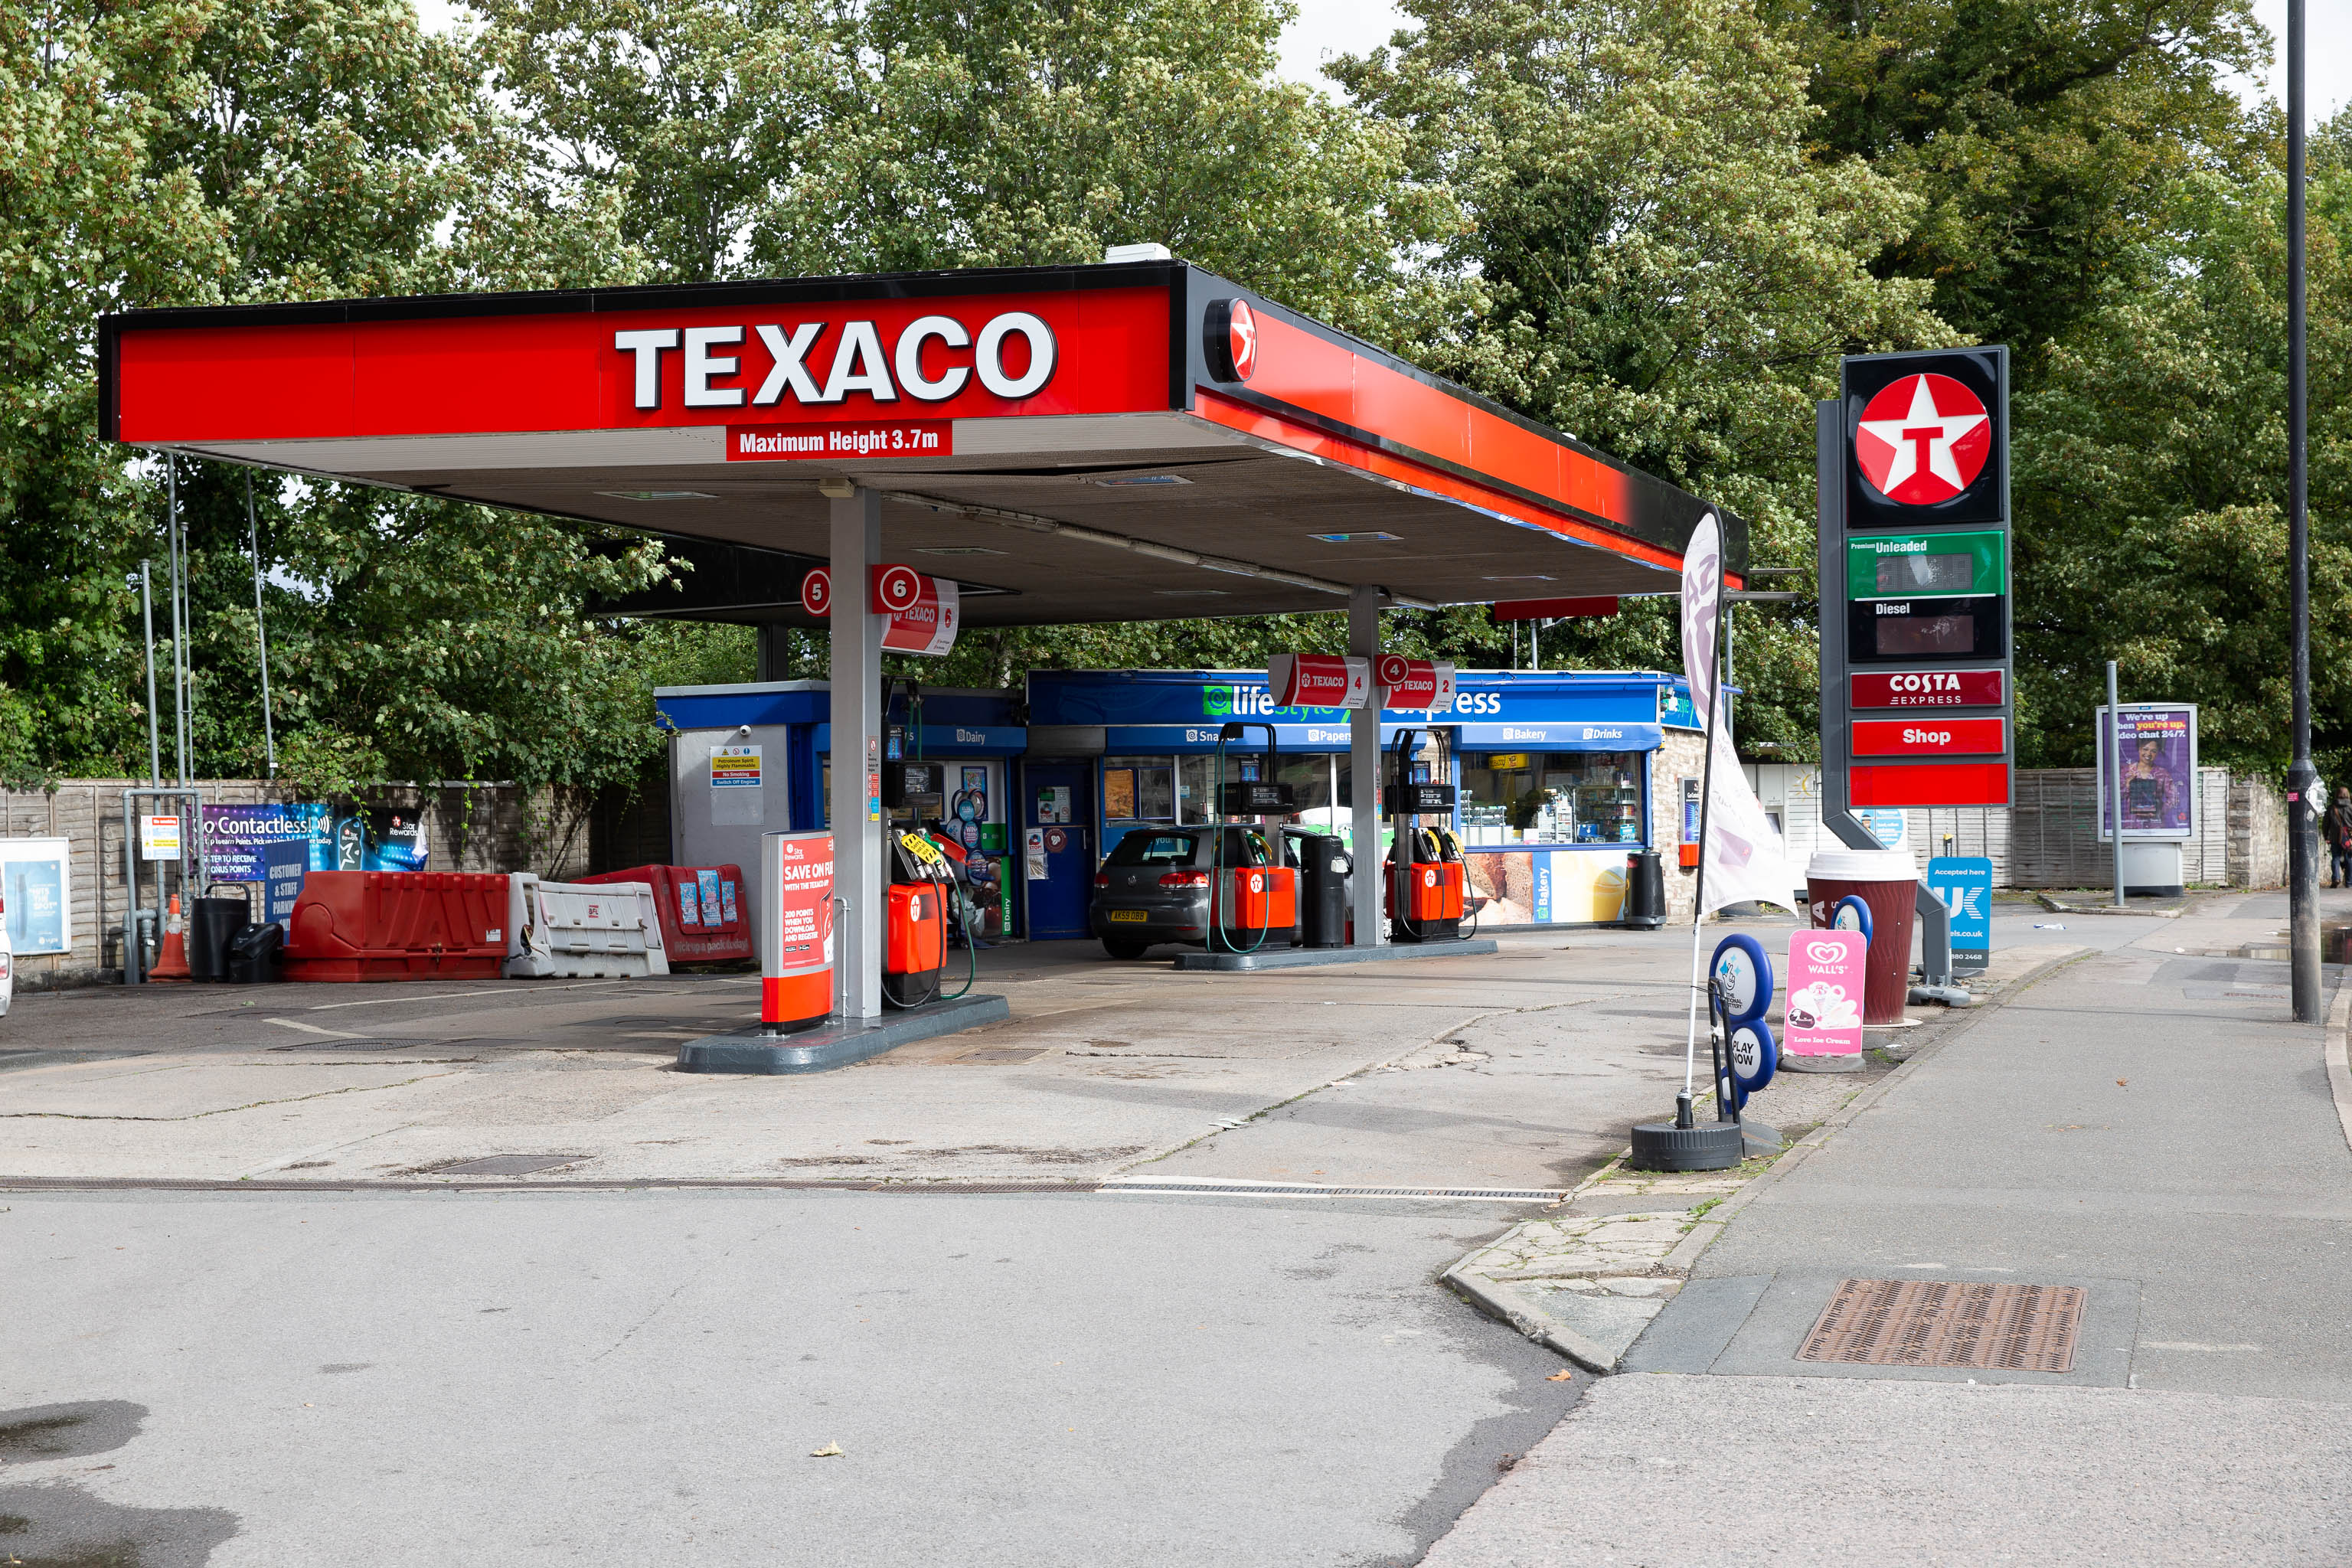 Current Affairs
Here's a sign of the times: a petrol station that's out of petrol. According to the BBC, the current petrol supply crisis is still biting in the so...